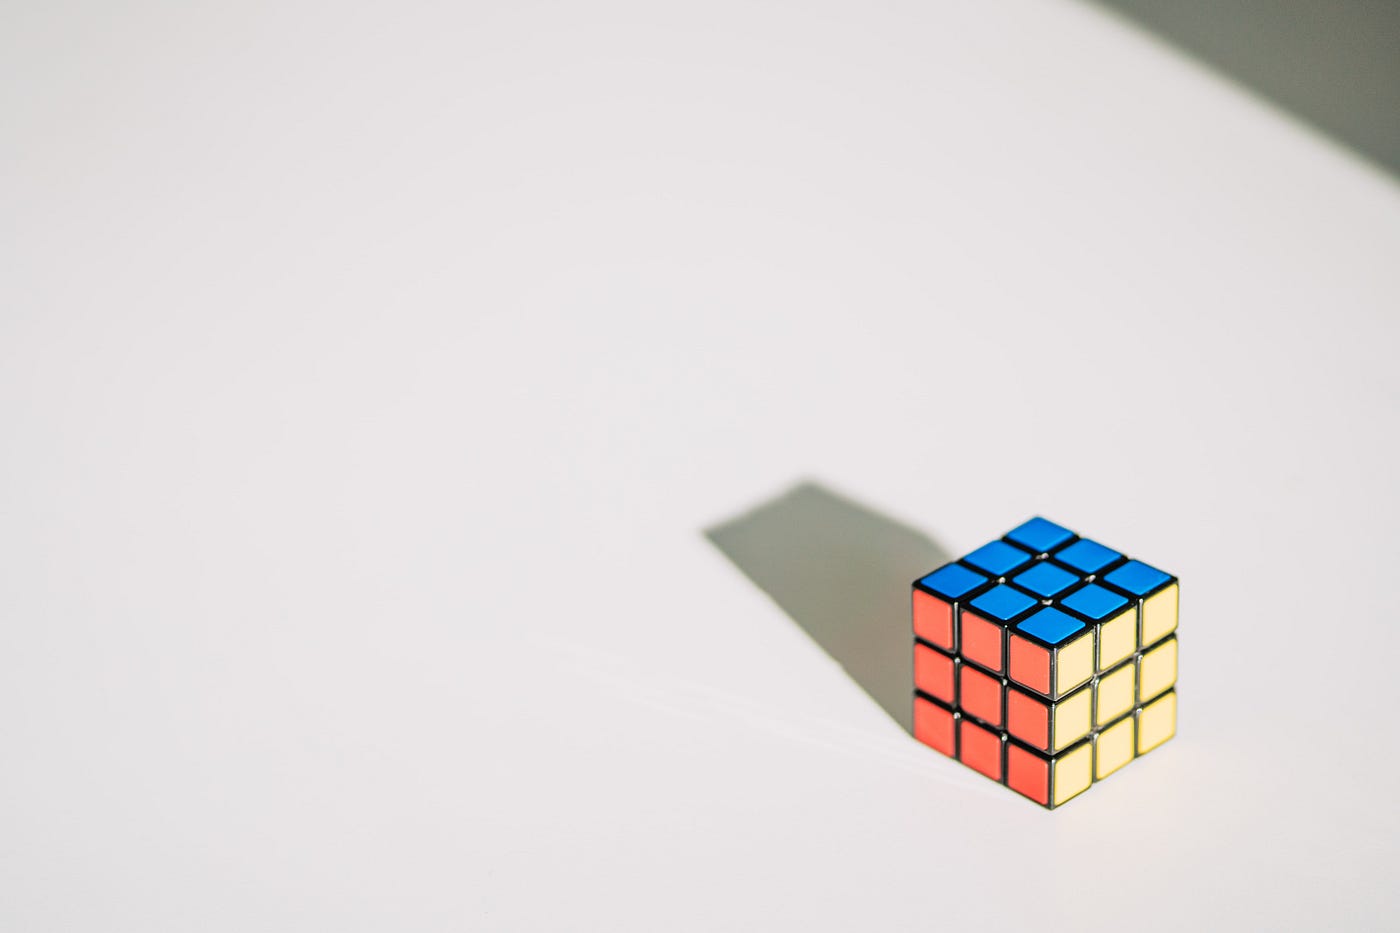 Image of a solved Rubiks cube